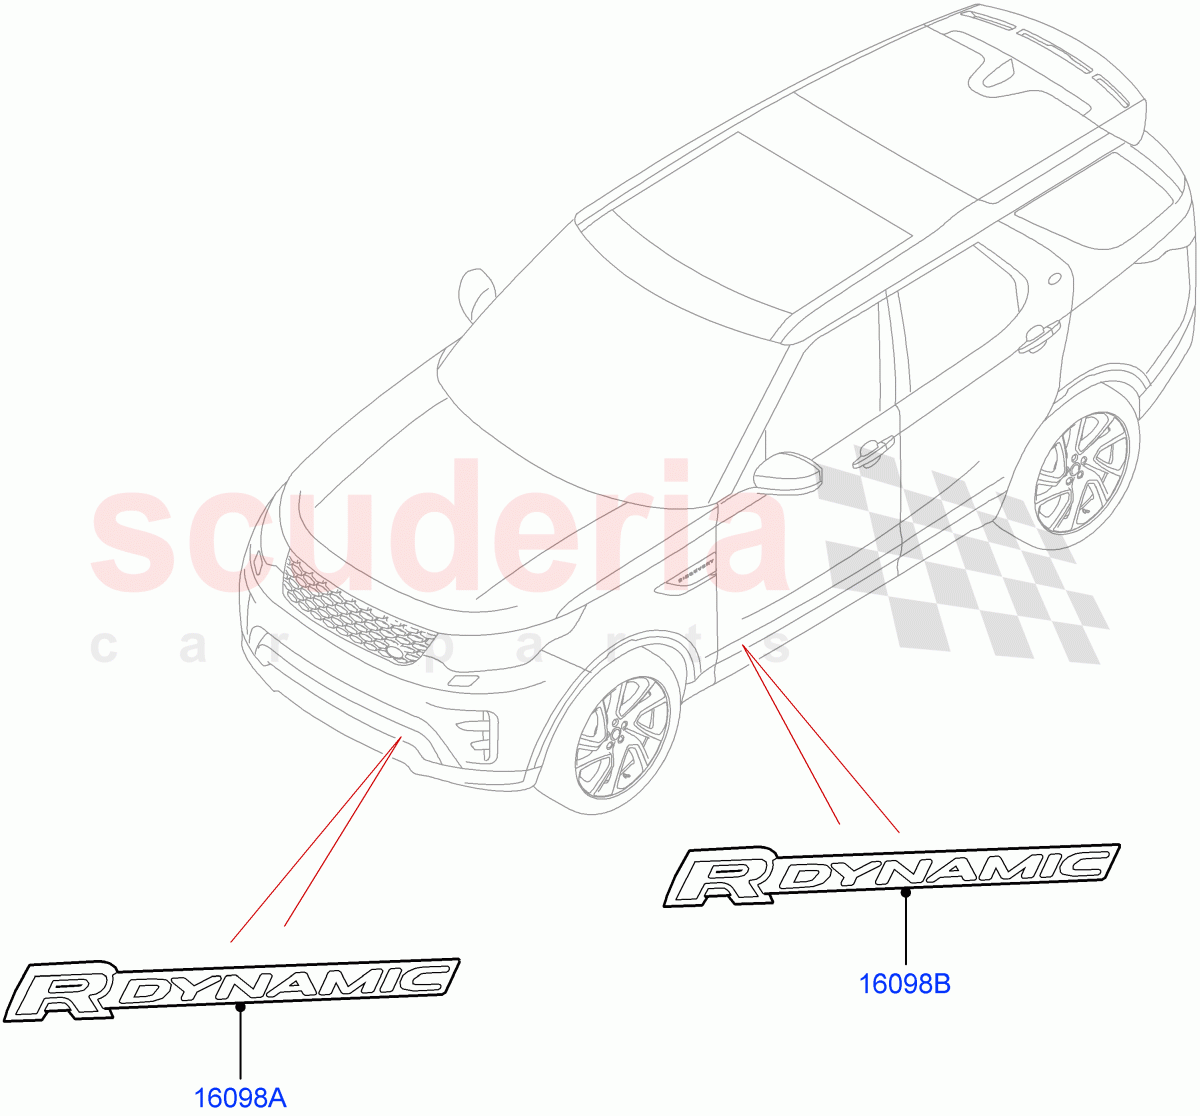 Name Plates(Nitra Plant Build)(Version - R-Dynamic)((V)FROMM2000001) of Land Rover Land Rover Discovery 5 (2017+) [2.0 Turbo Diesel]